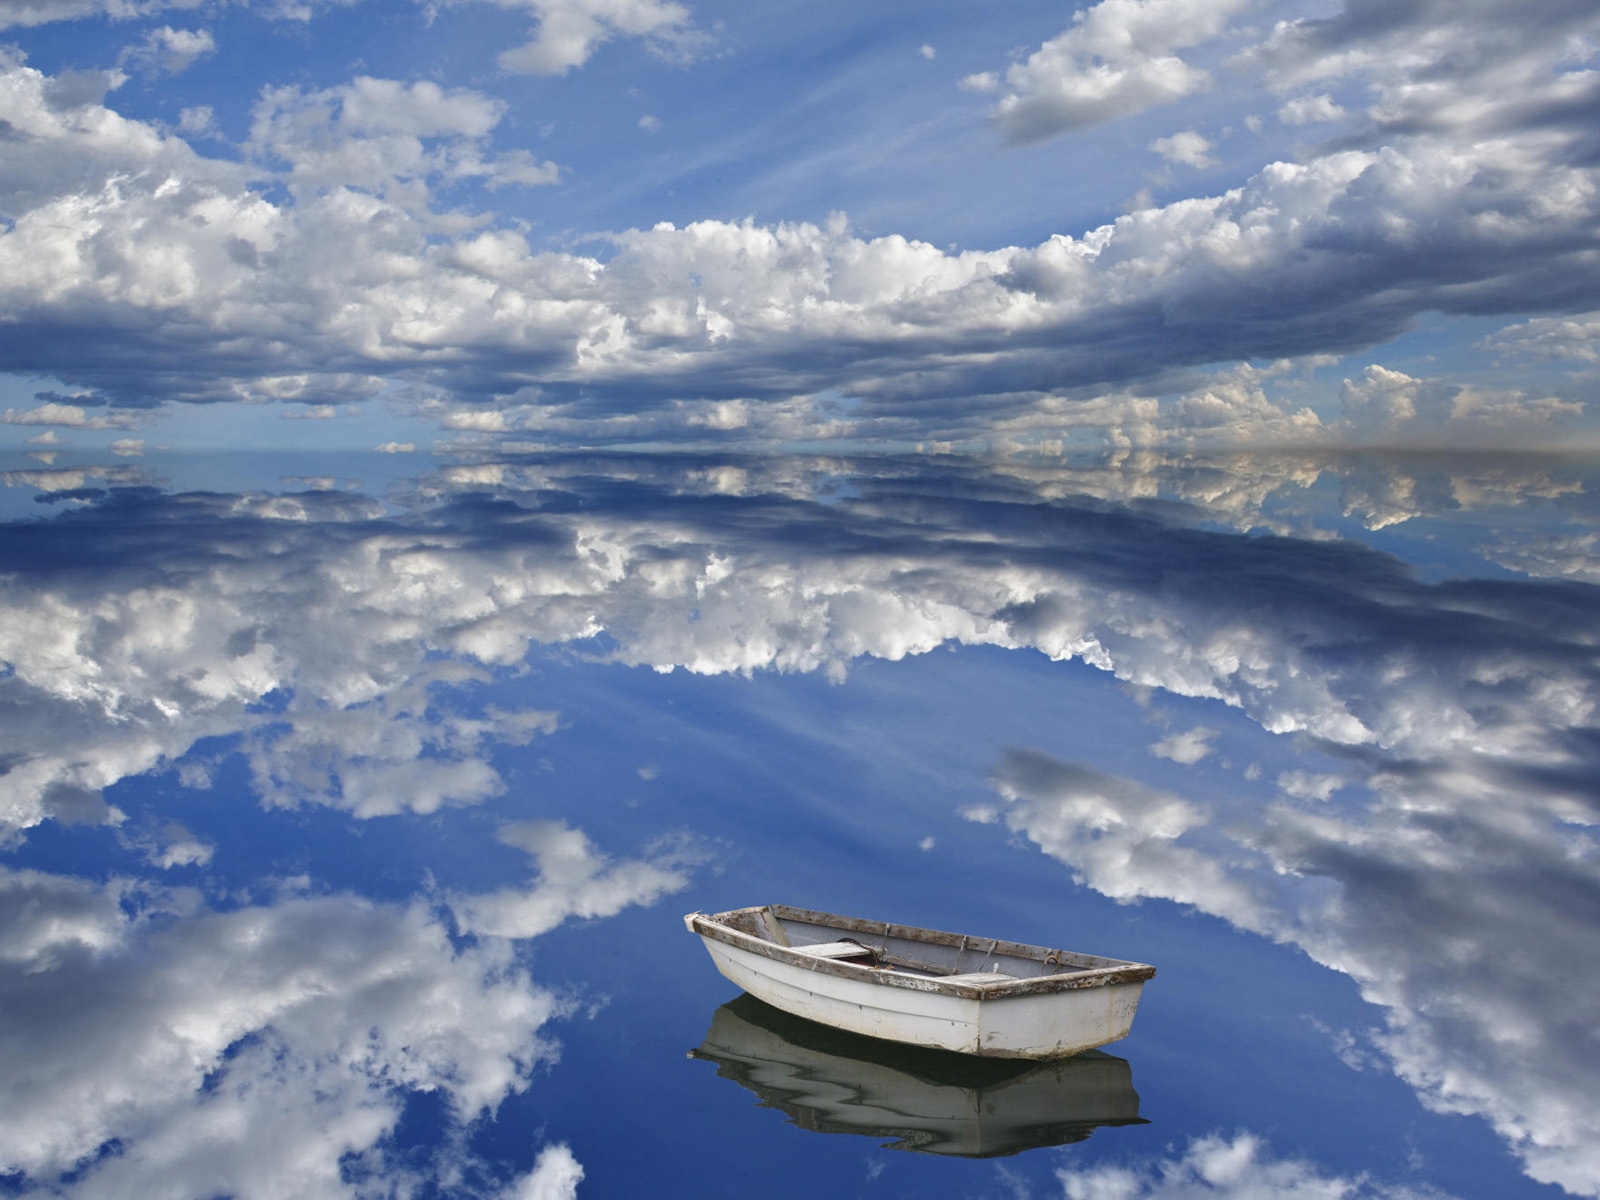 Boat and clouds reflecting on ocean, Bar Harbor, Maine